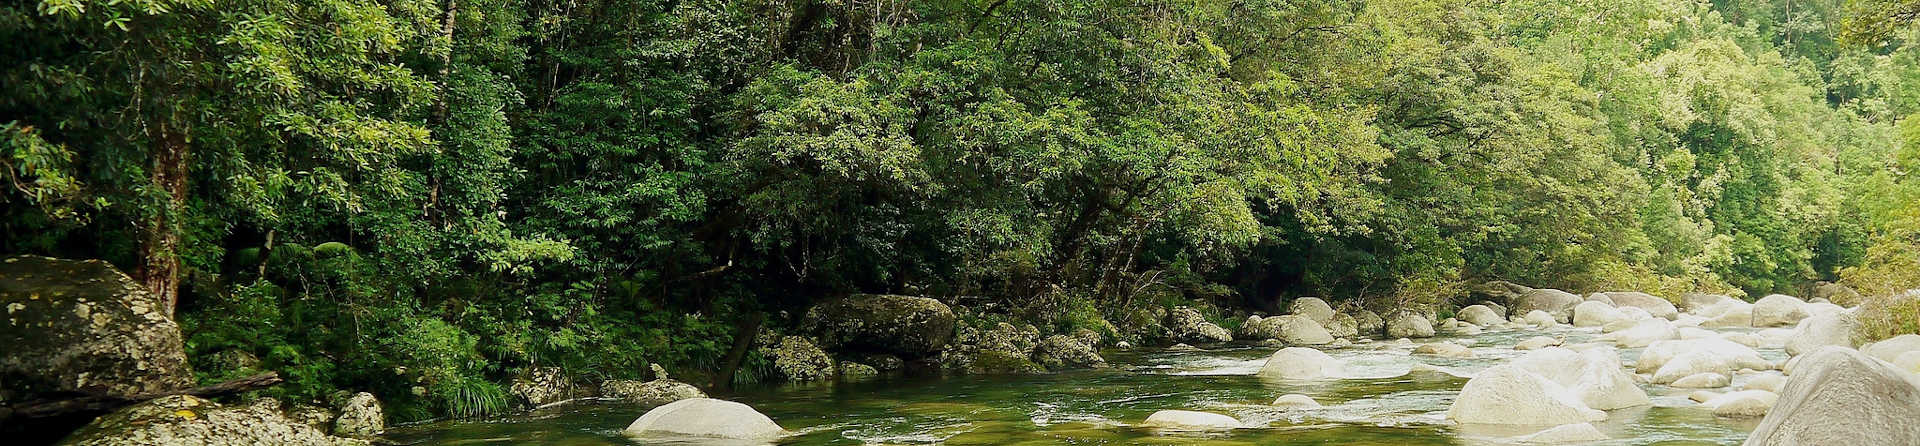 How do you get to the Daintree rainforest?